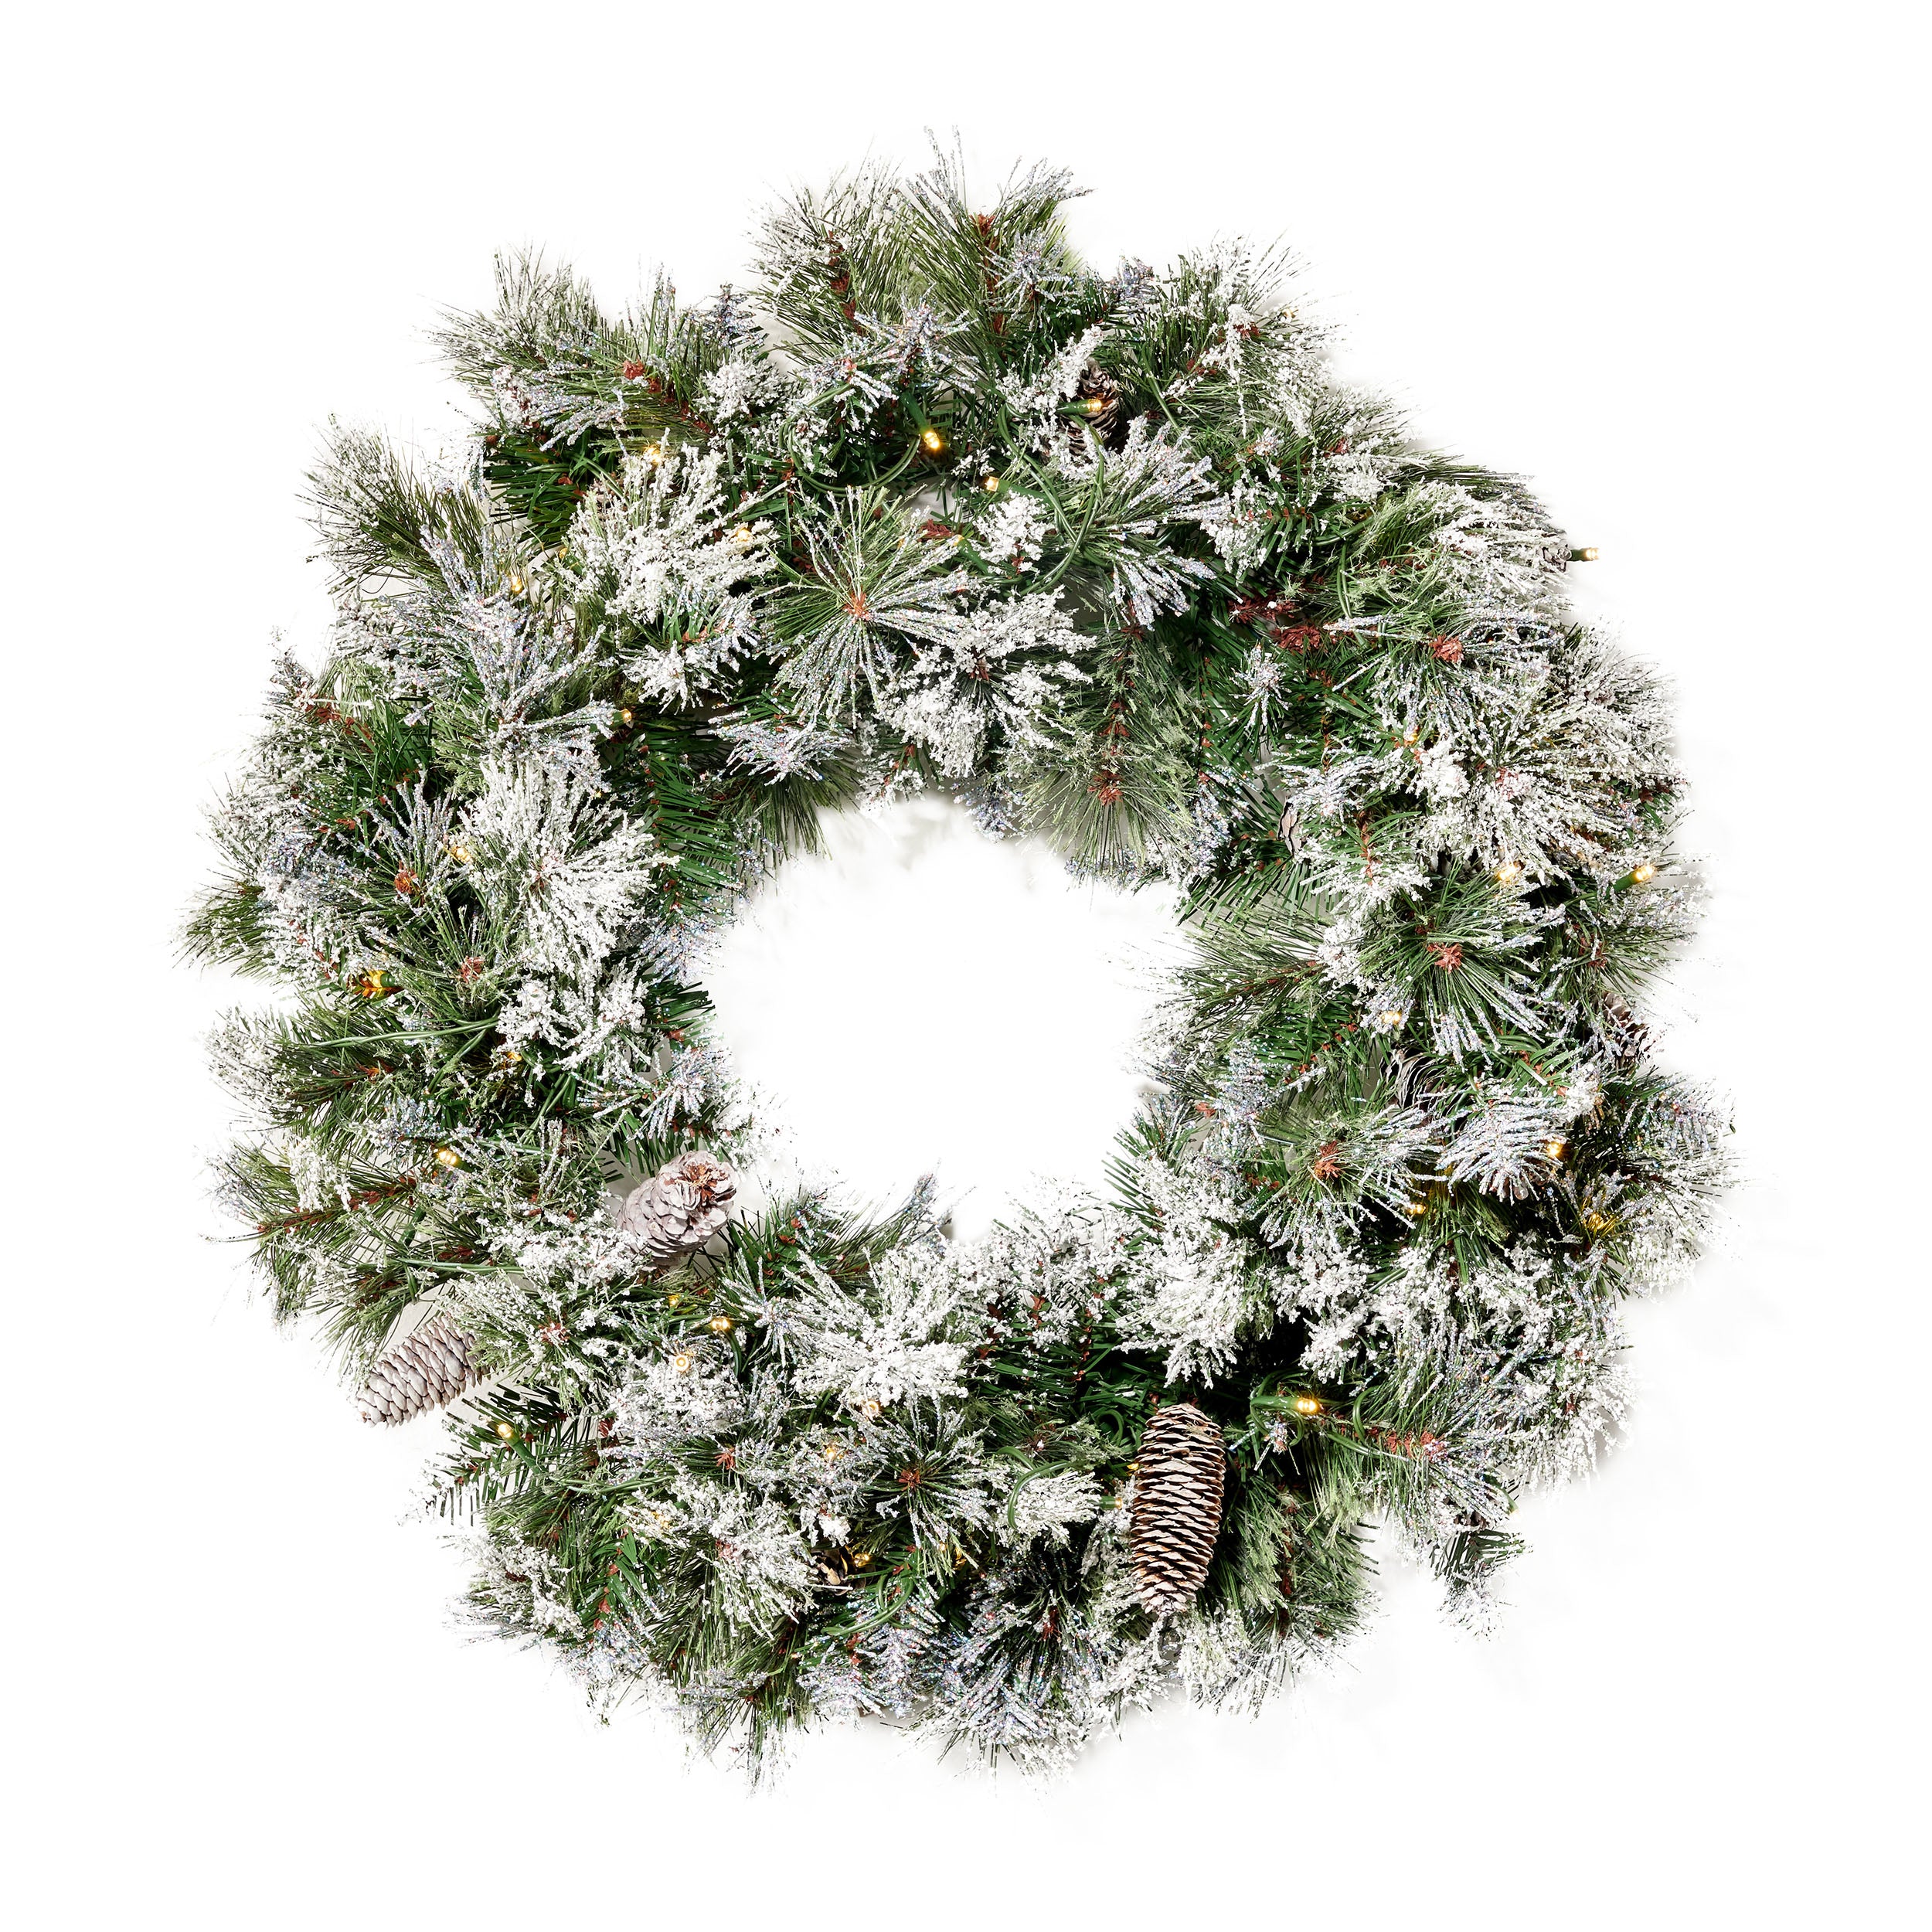 24 Cashmere Pine and Mixed Needles Warm White LED Artificial Christmas Wreath with Flocked Snow Glitter Branches and Pinecones